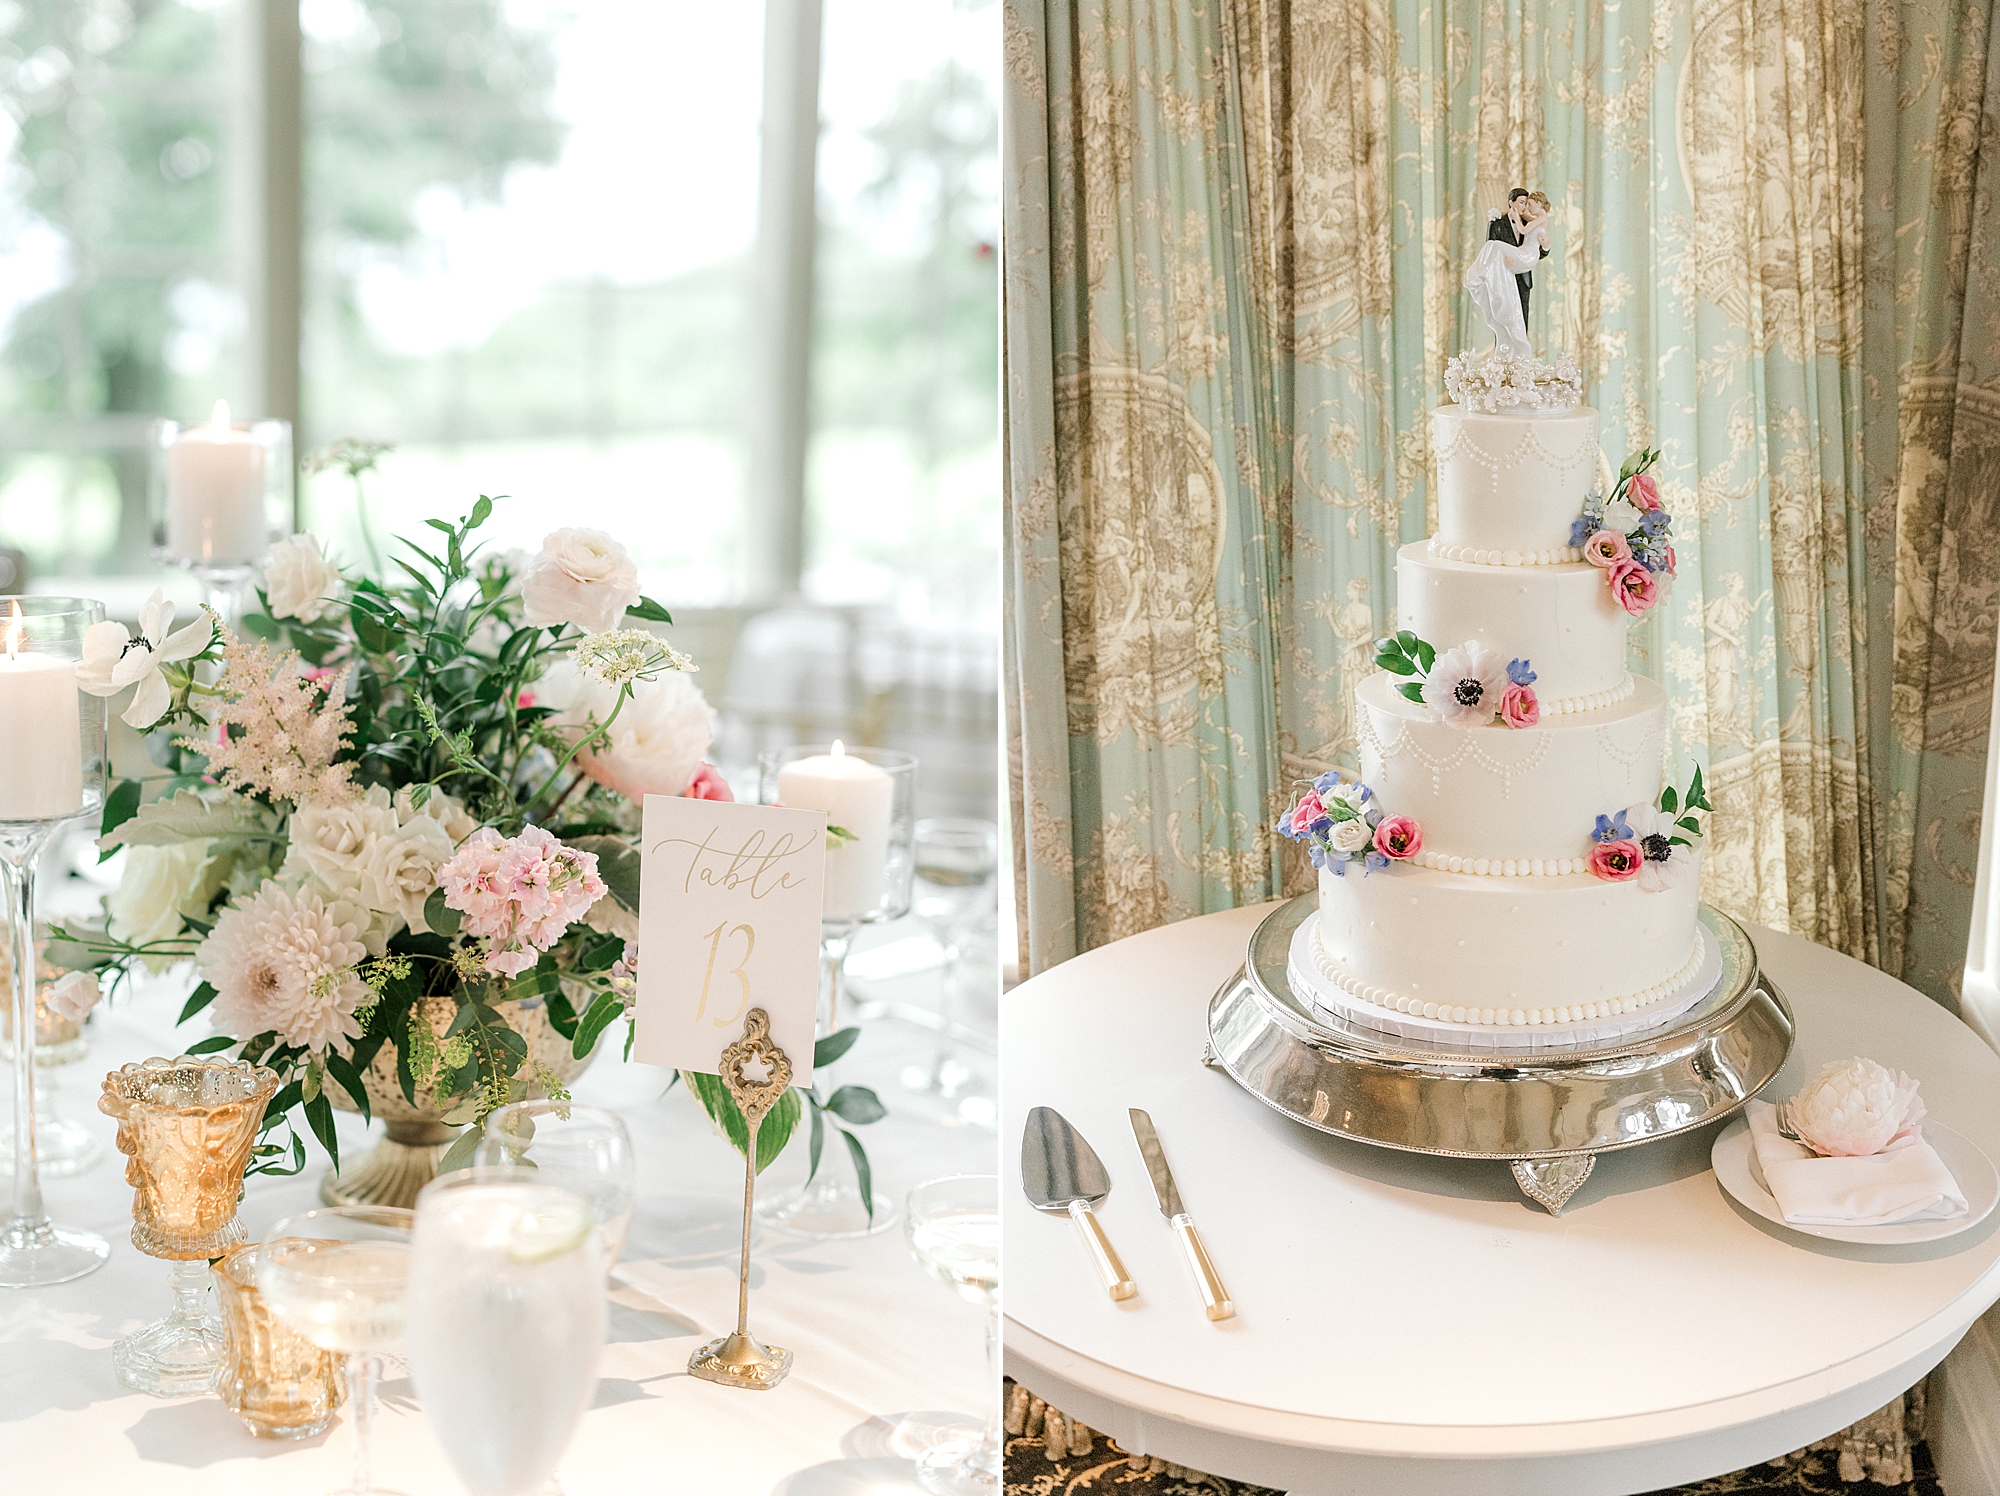 pink and white floral centerpieces with tiered wedding cake for classic Sumer wedding reception at the Ashford Estate